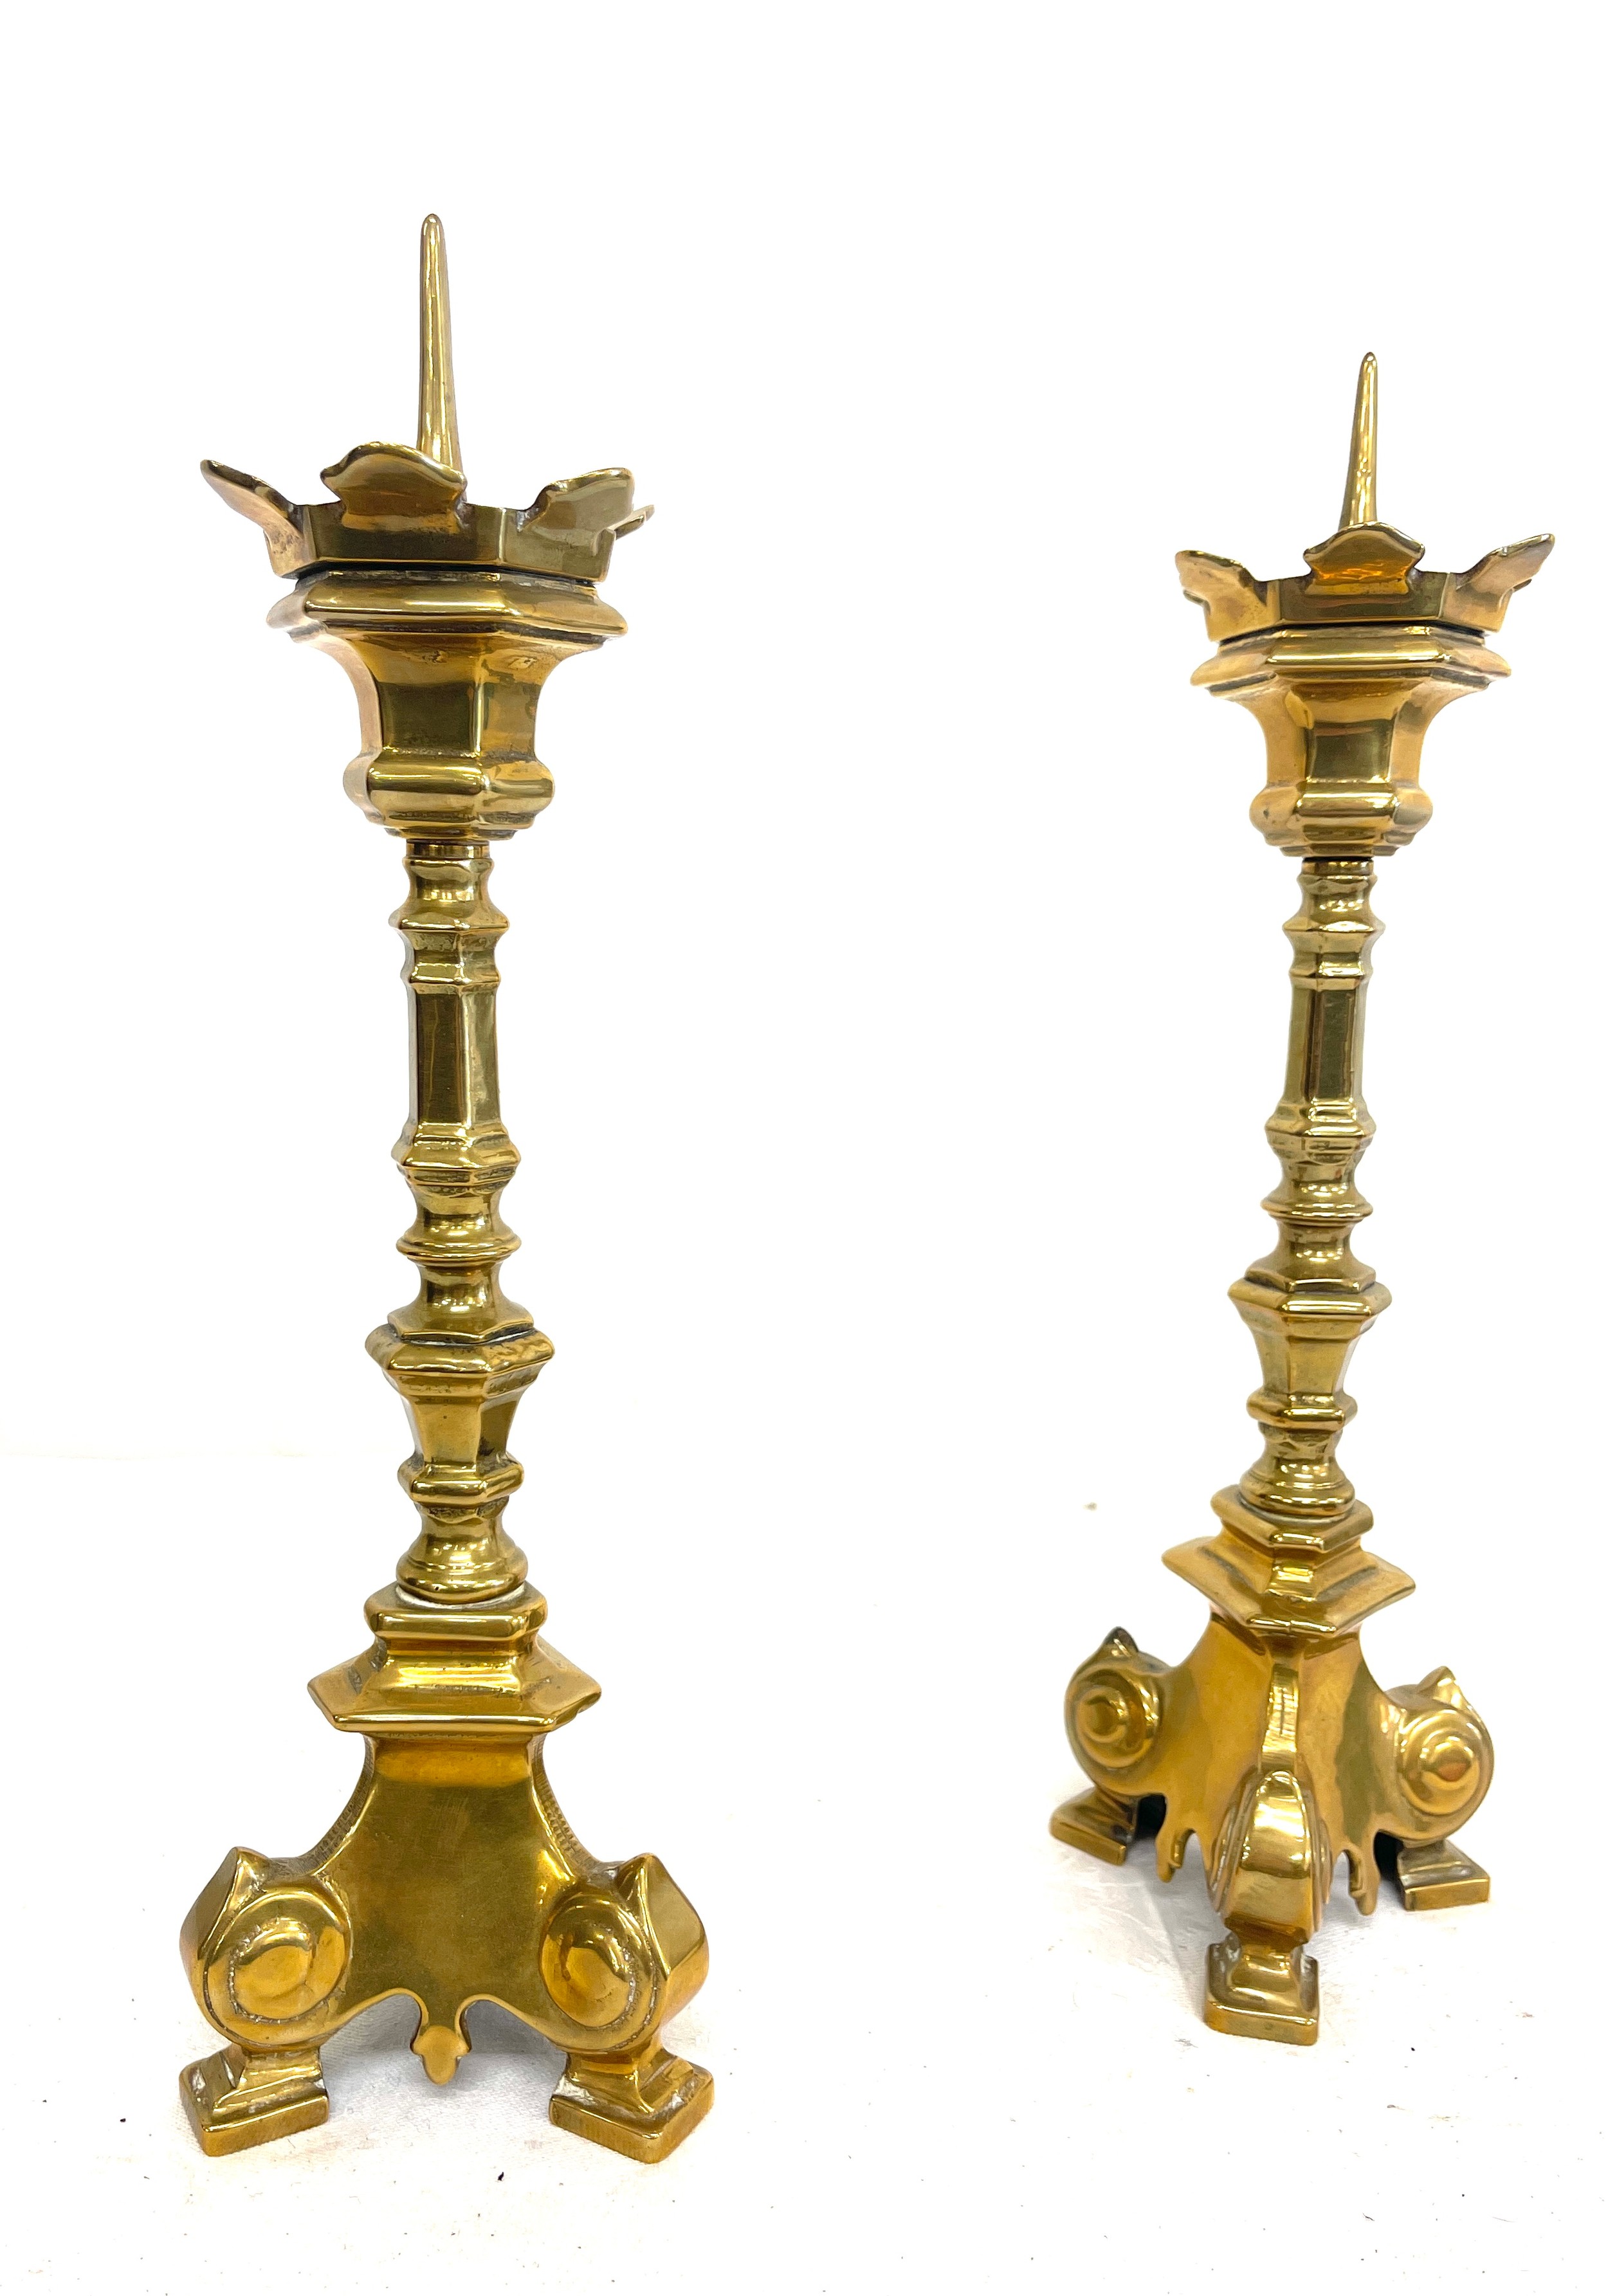 Vintage pair of brass candlesticks, approximate height: 12 inches